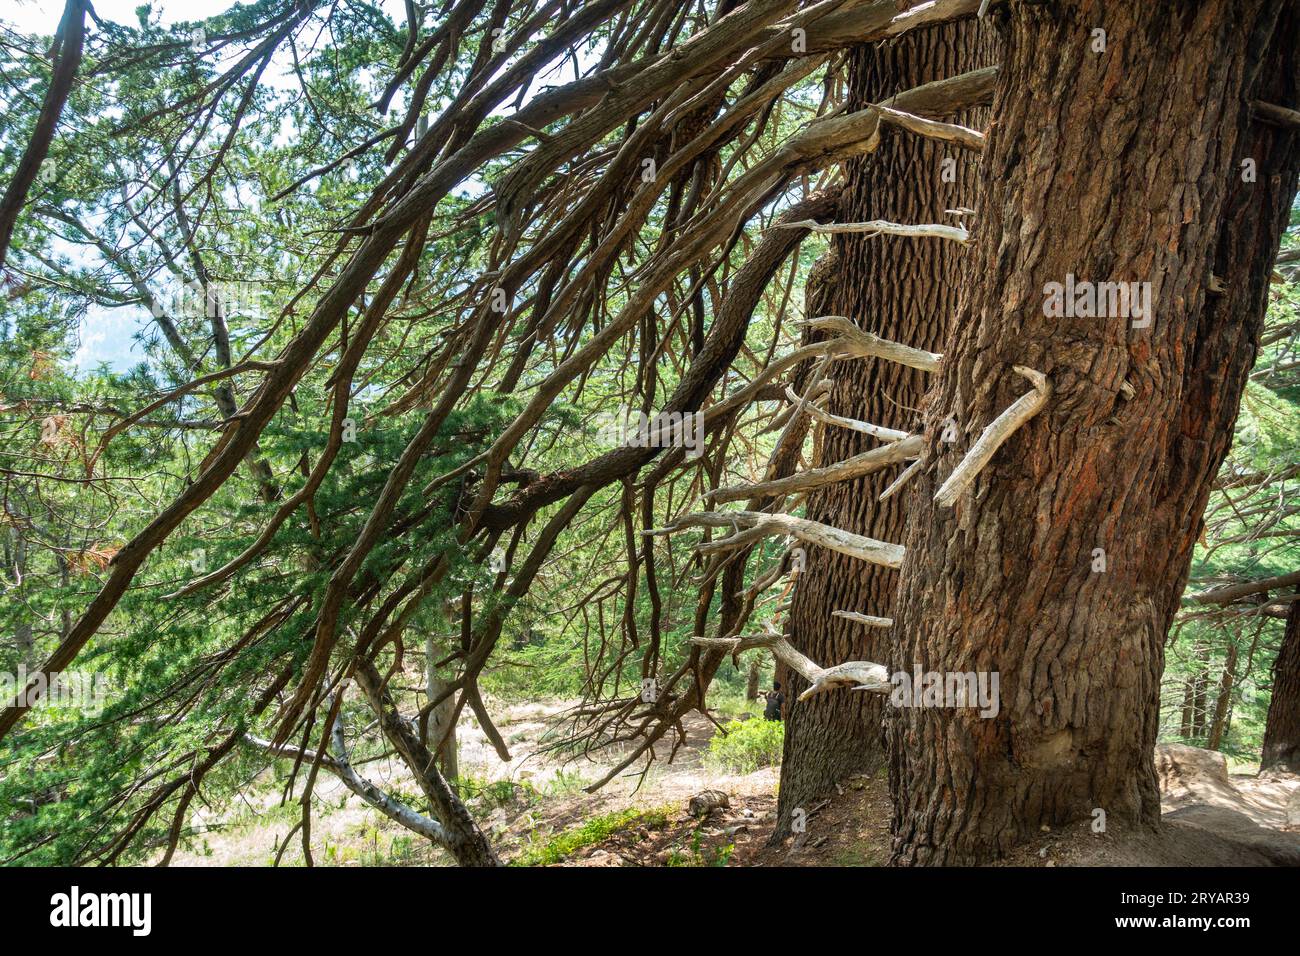 Giant Deodar Cedar tree in Himachal Pradesh forest, with new stems emerging from the main trunk Stock Photo